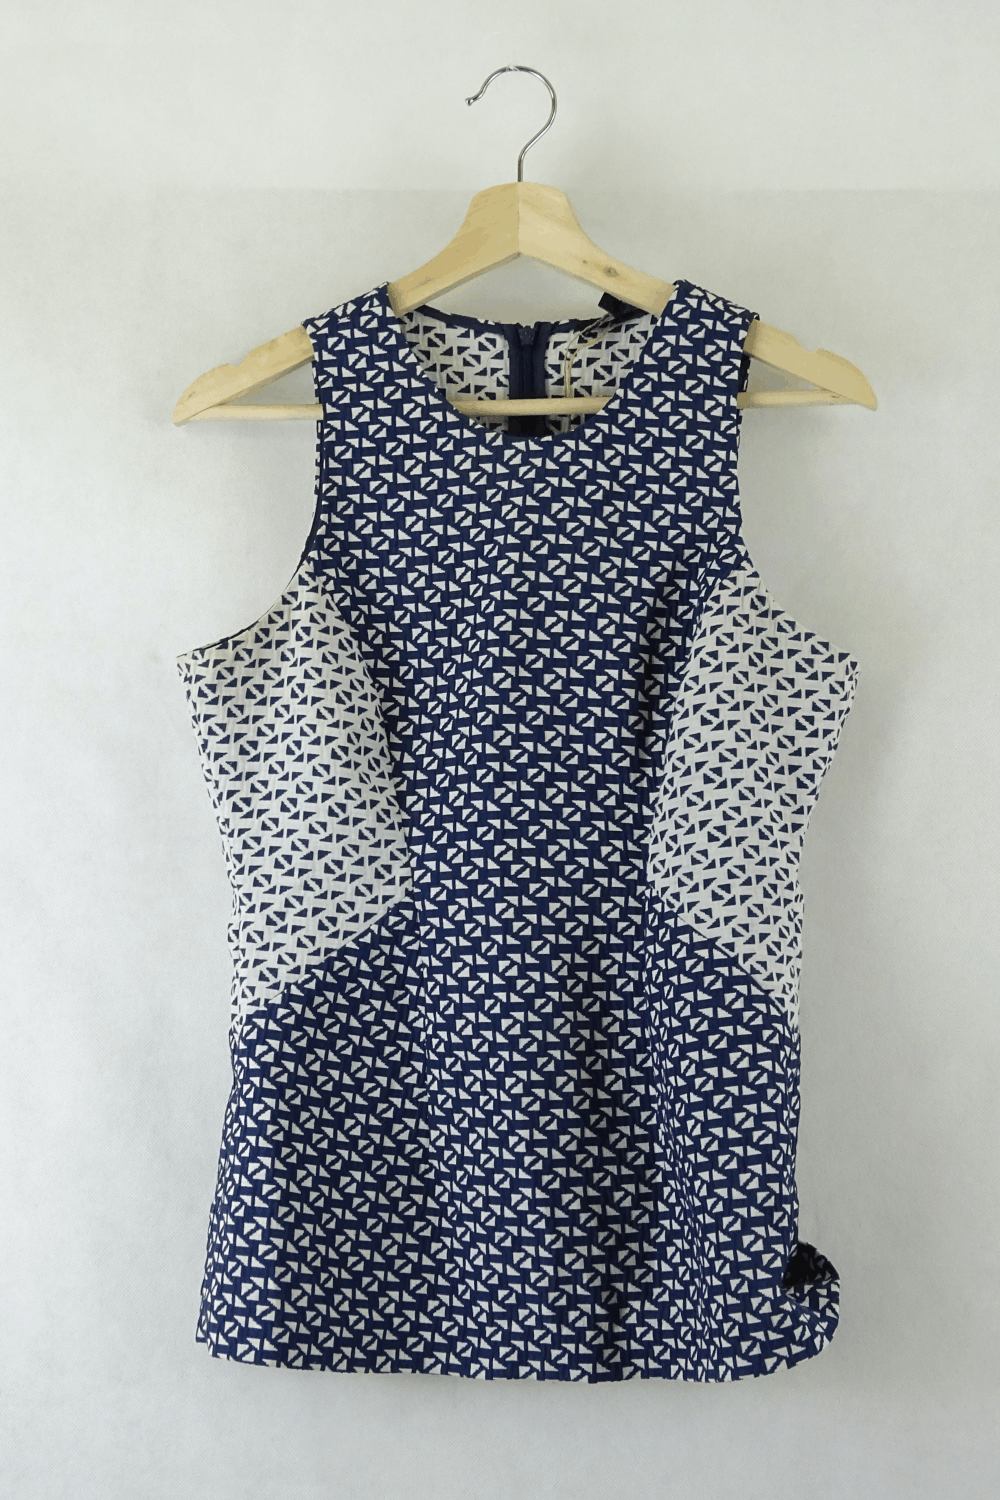 Saba Blue and White Patterned Top 10